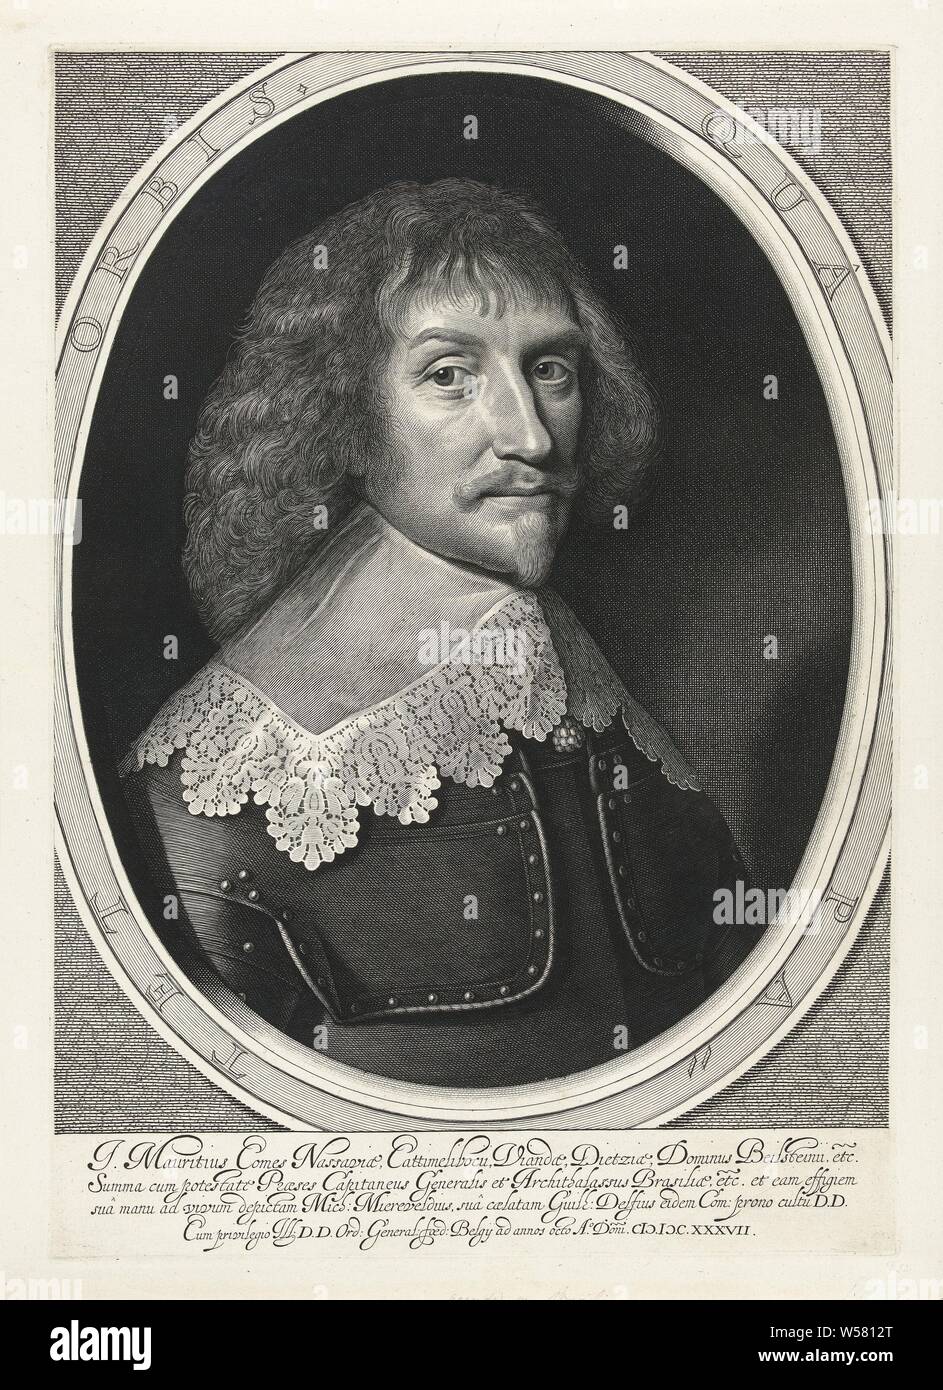 Portrait of Johan Maurits, Count of Nassau-Siegen, bust with flat collar and armor in oval frame with Latin motto. In Latin margin in four lines., Commander-in-chief, general, marshal, Johan Maurits count of Nassau-Siegen, Willem Jacobsz. Delff (mentioned on object), Delft, 1637, paper, engraving, h 425 mm × w 298 mm Stock Photo